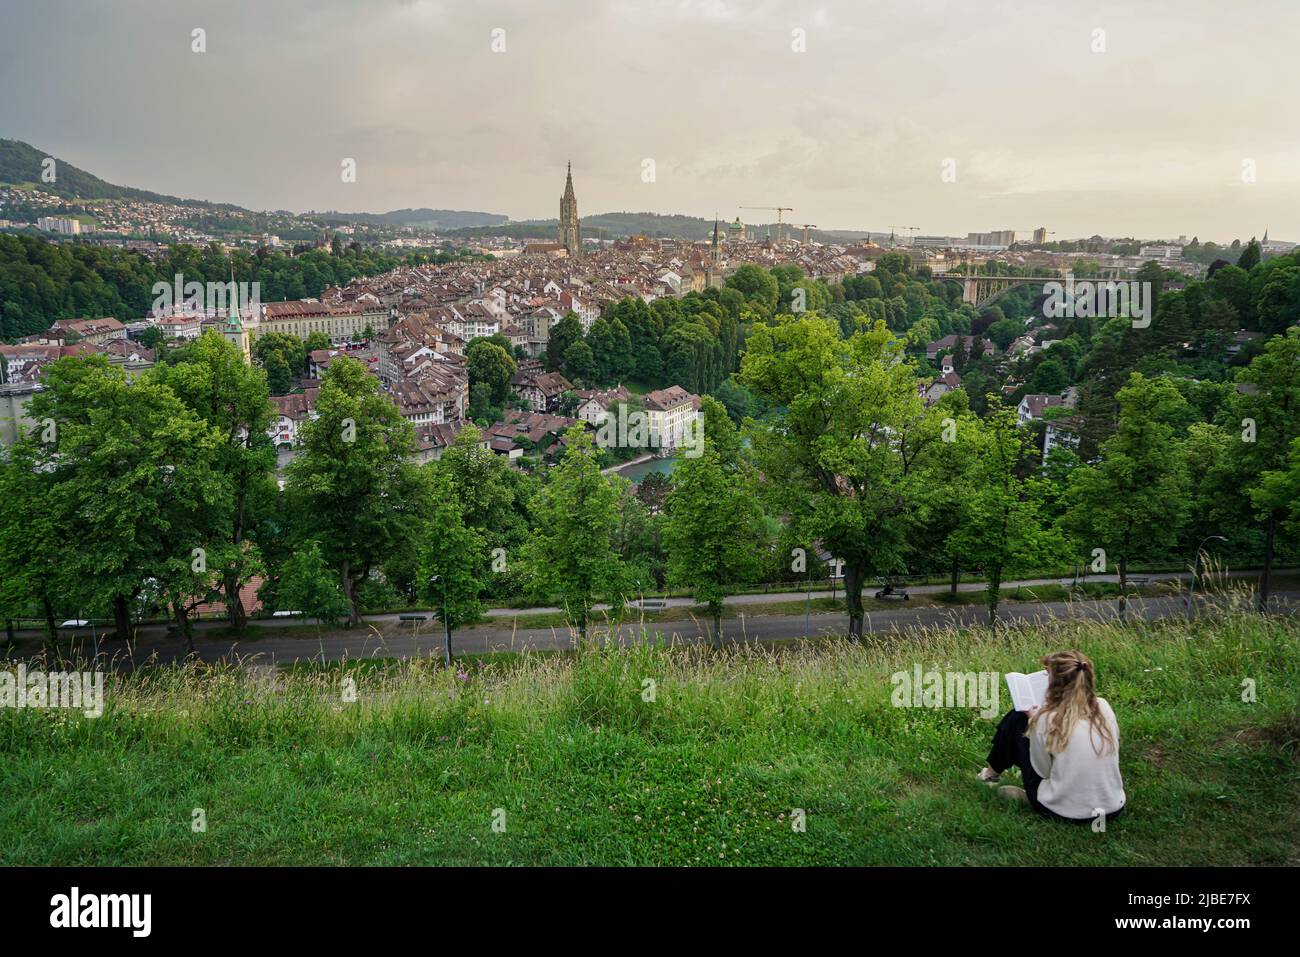 People admiring the splendid panoramic view of the old city of Berne from above. Bern, Switzerland - June 2022 Stock Photo